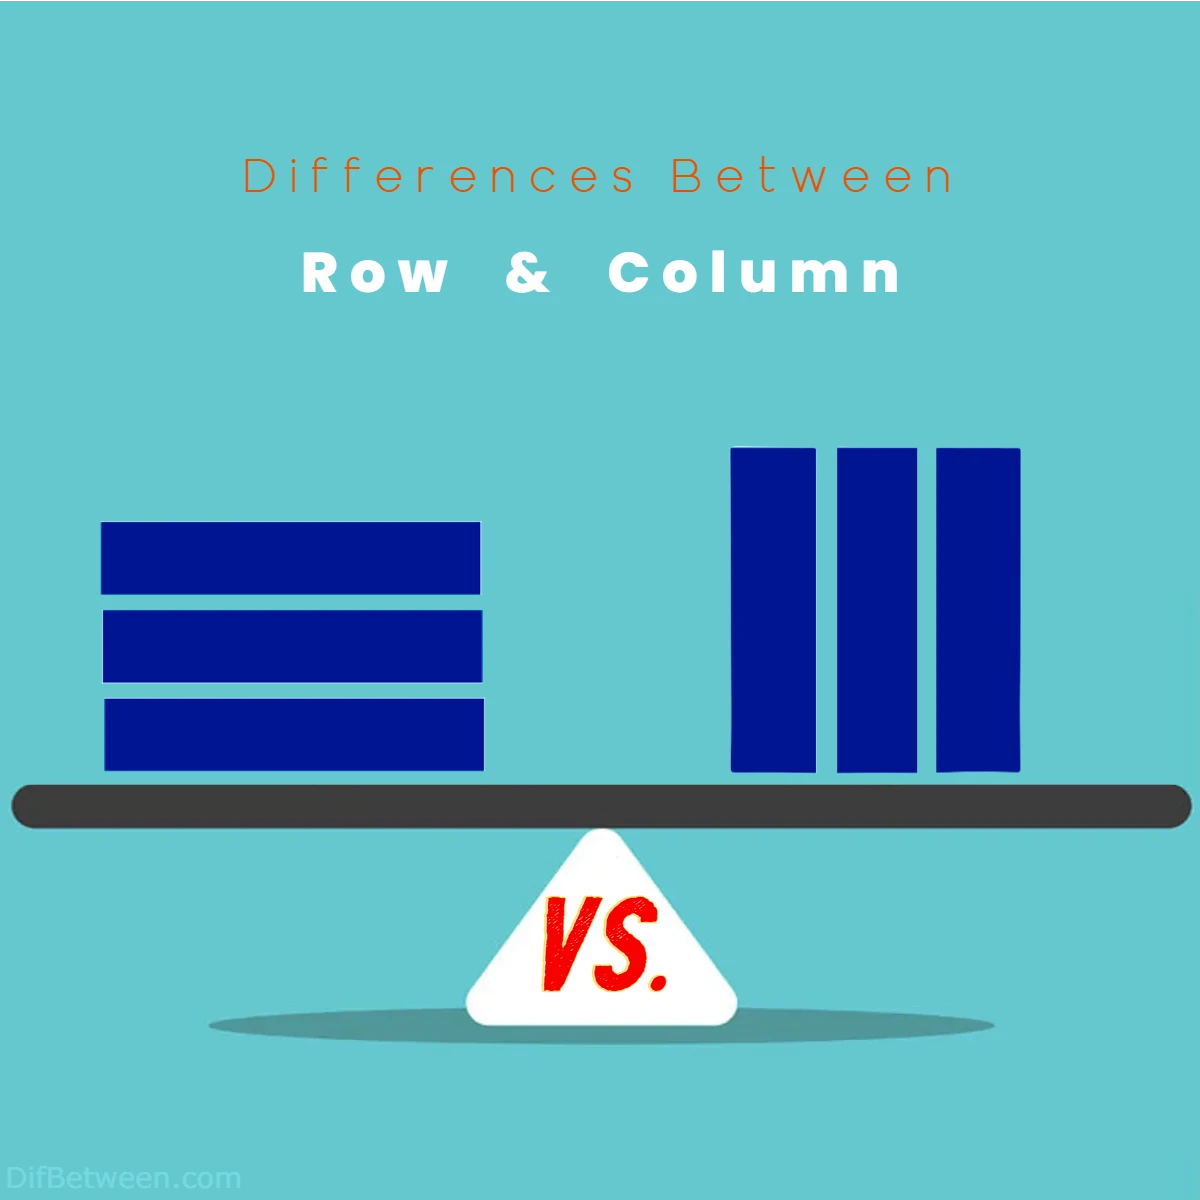 Differences Between Row vs Column